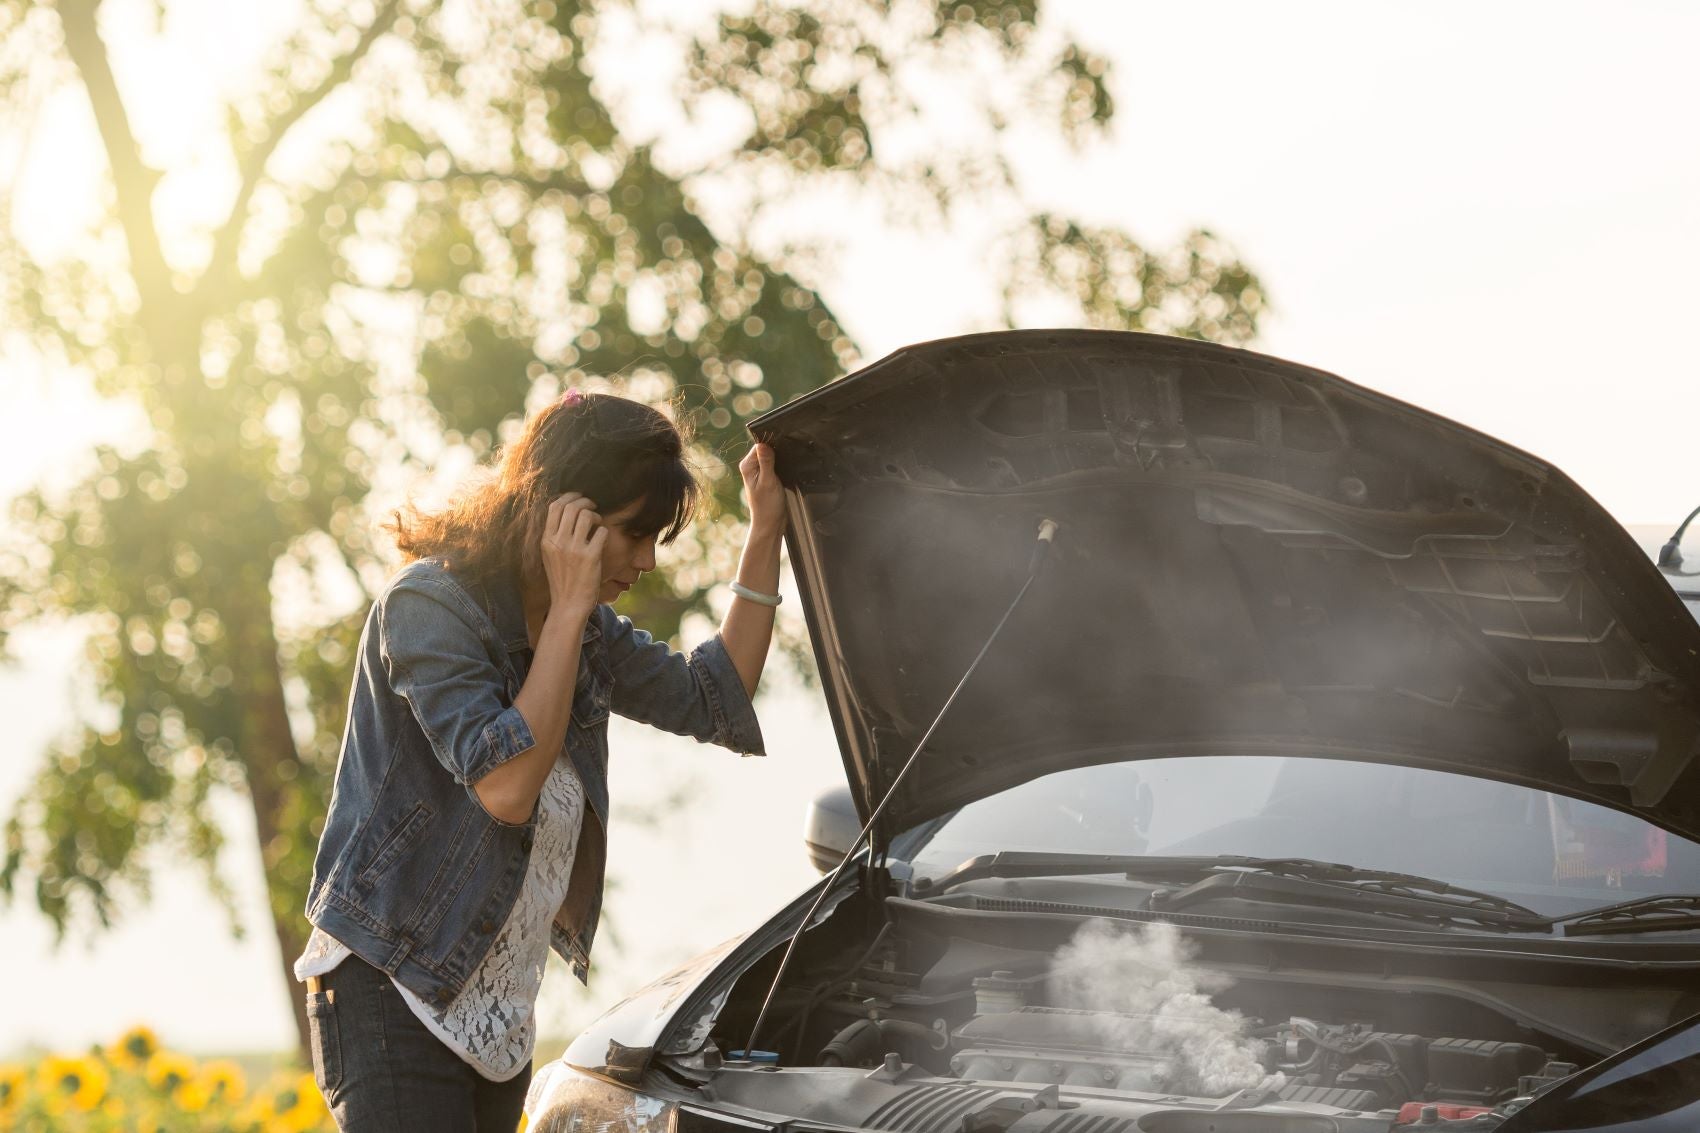 Woman Standing Next to Car That's Overheated